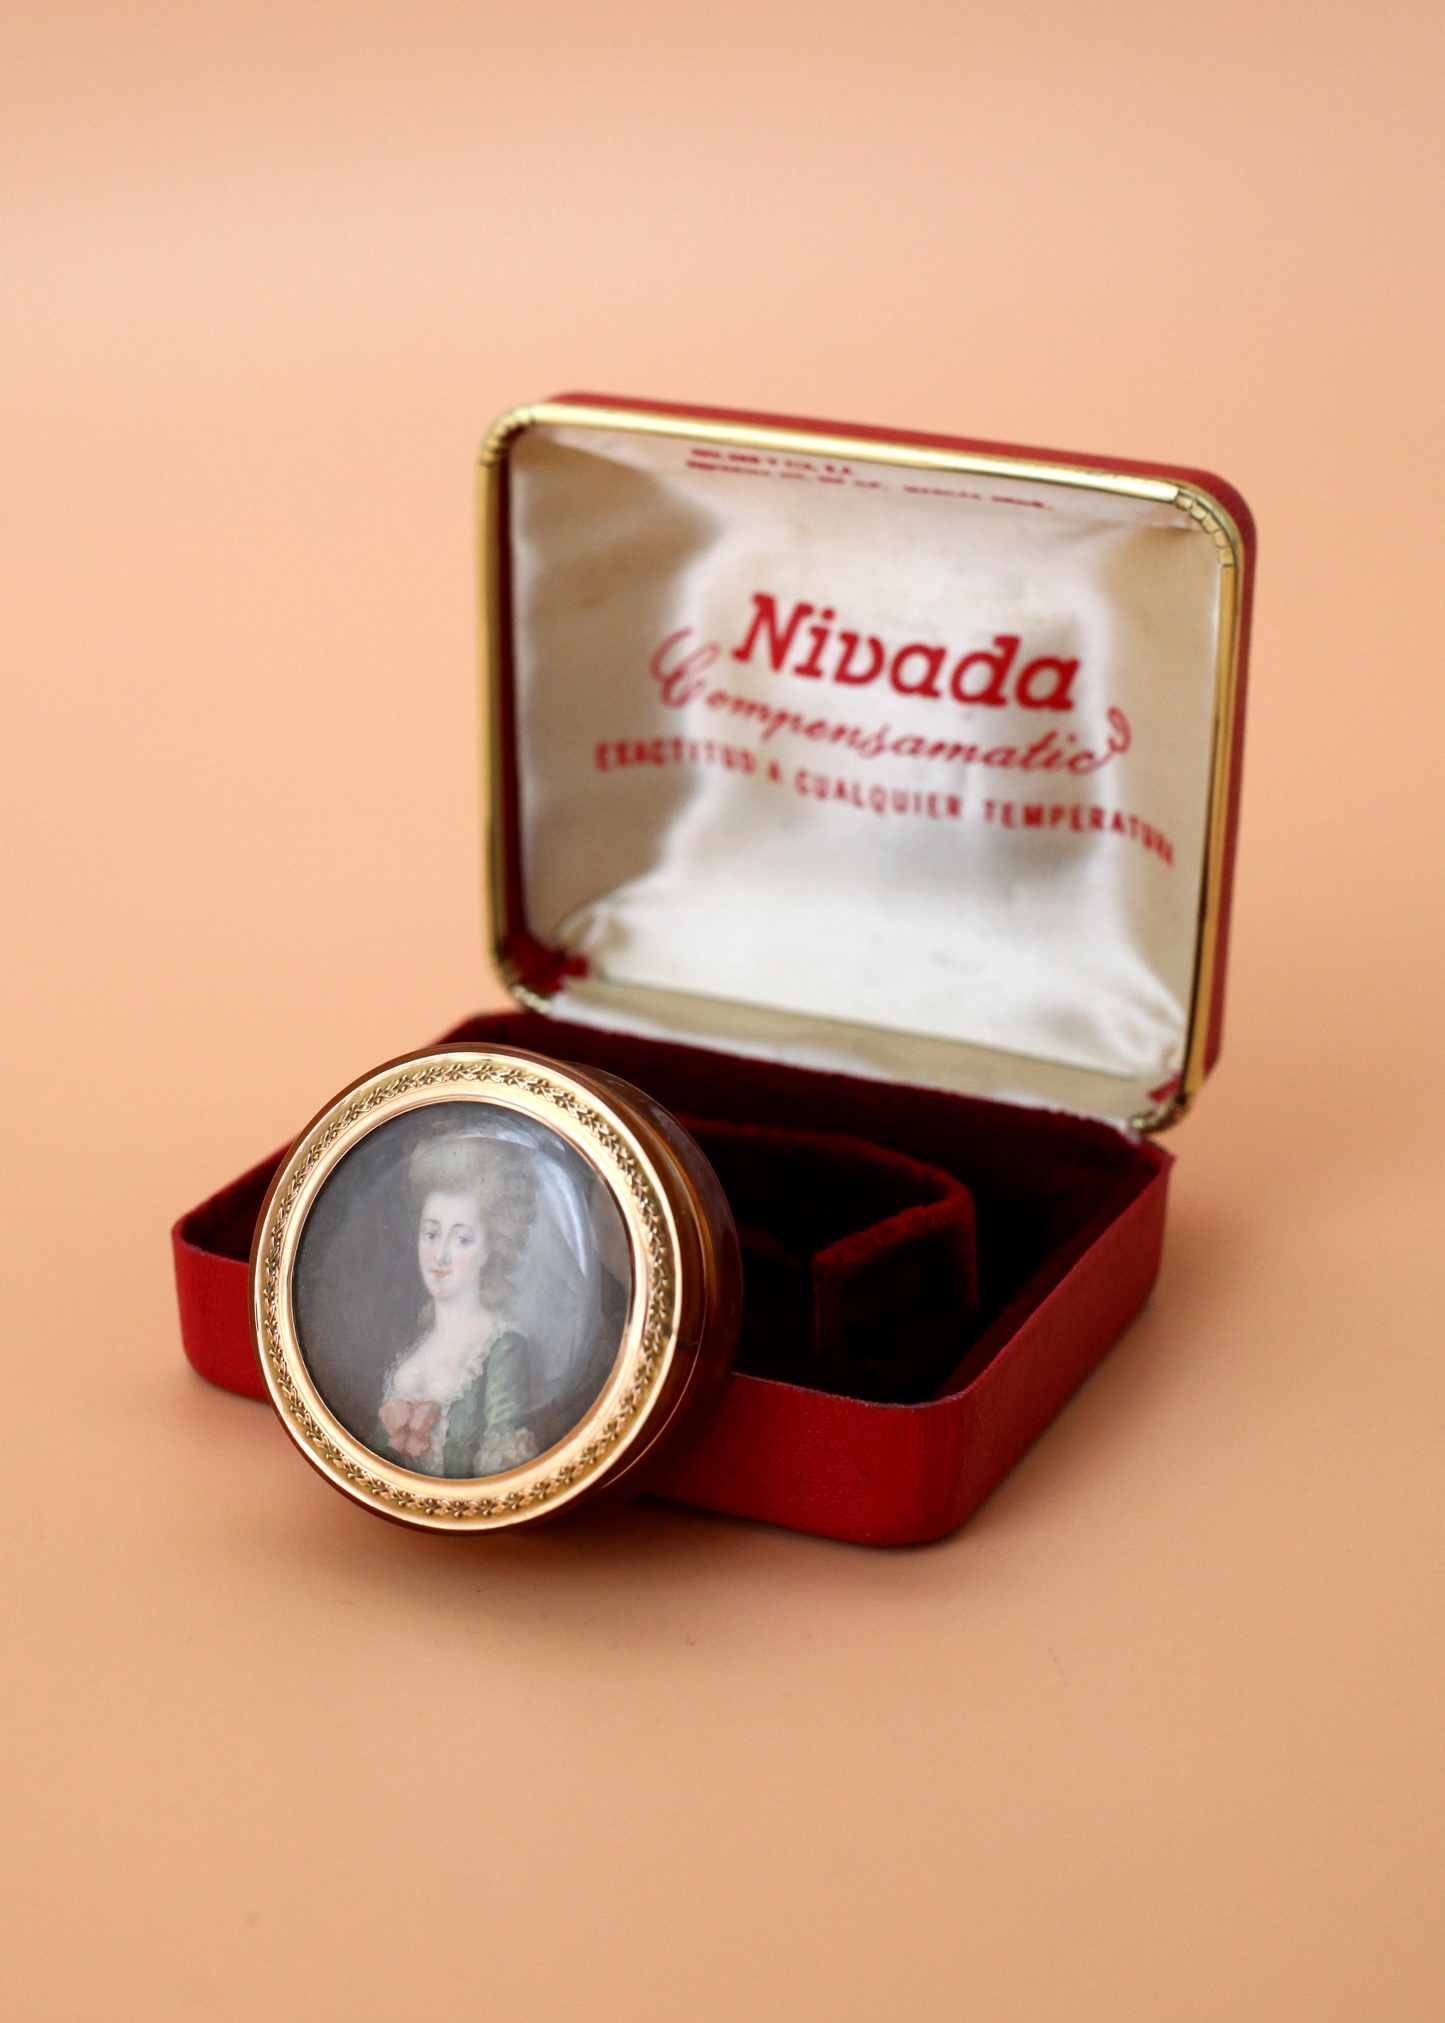 18th Century French 18kt Gold And Amber Snuffbox With Portrait Of A Lady